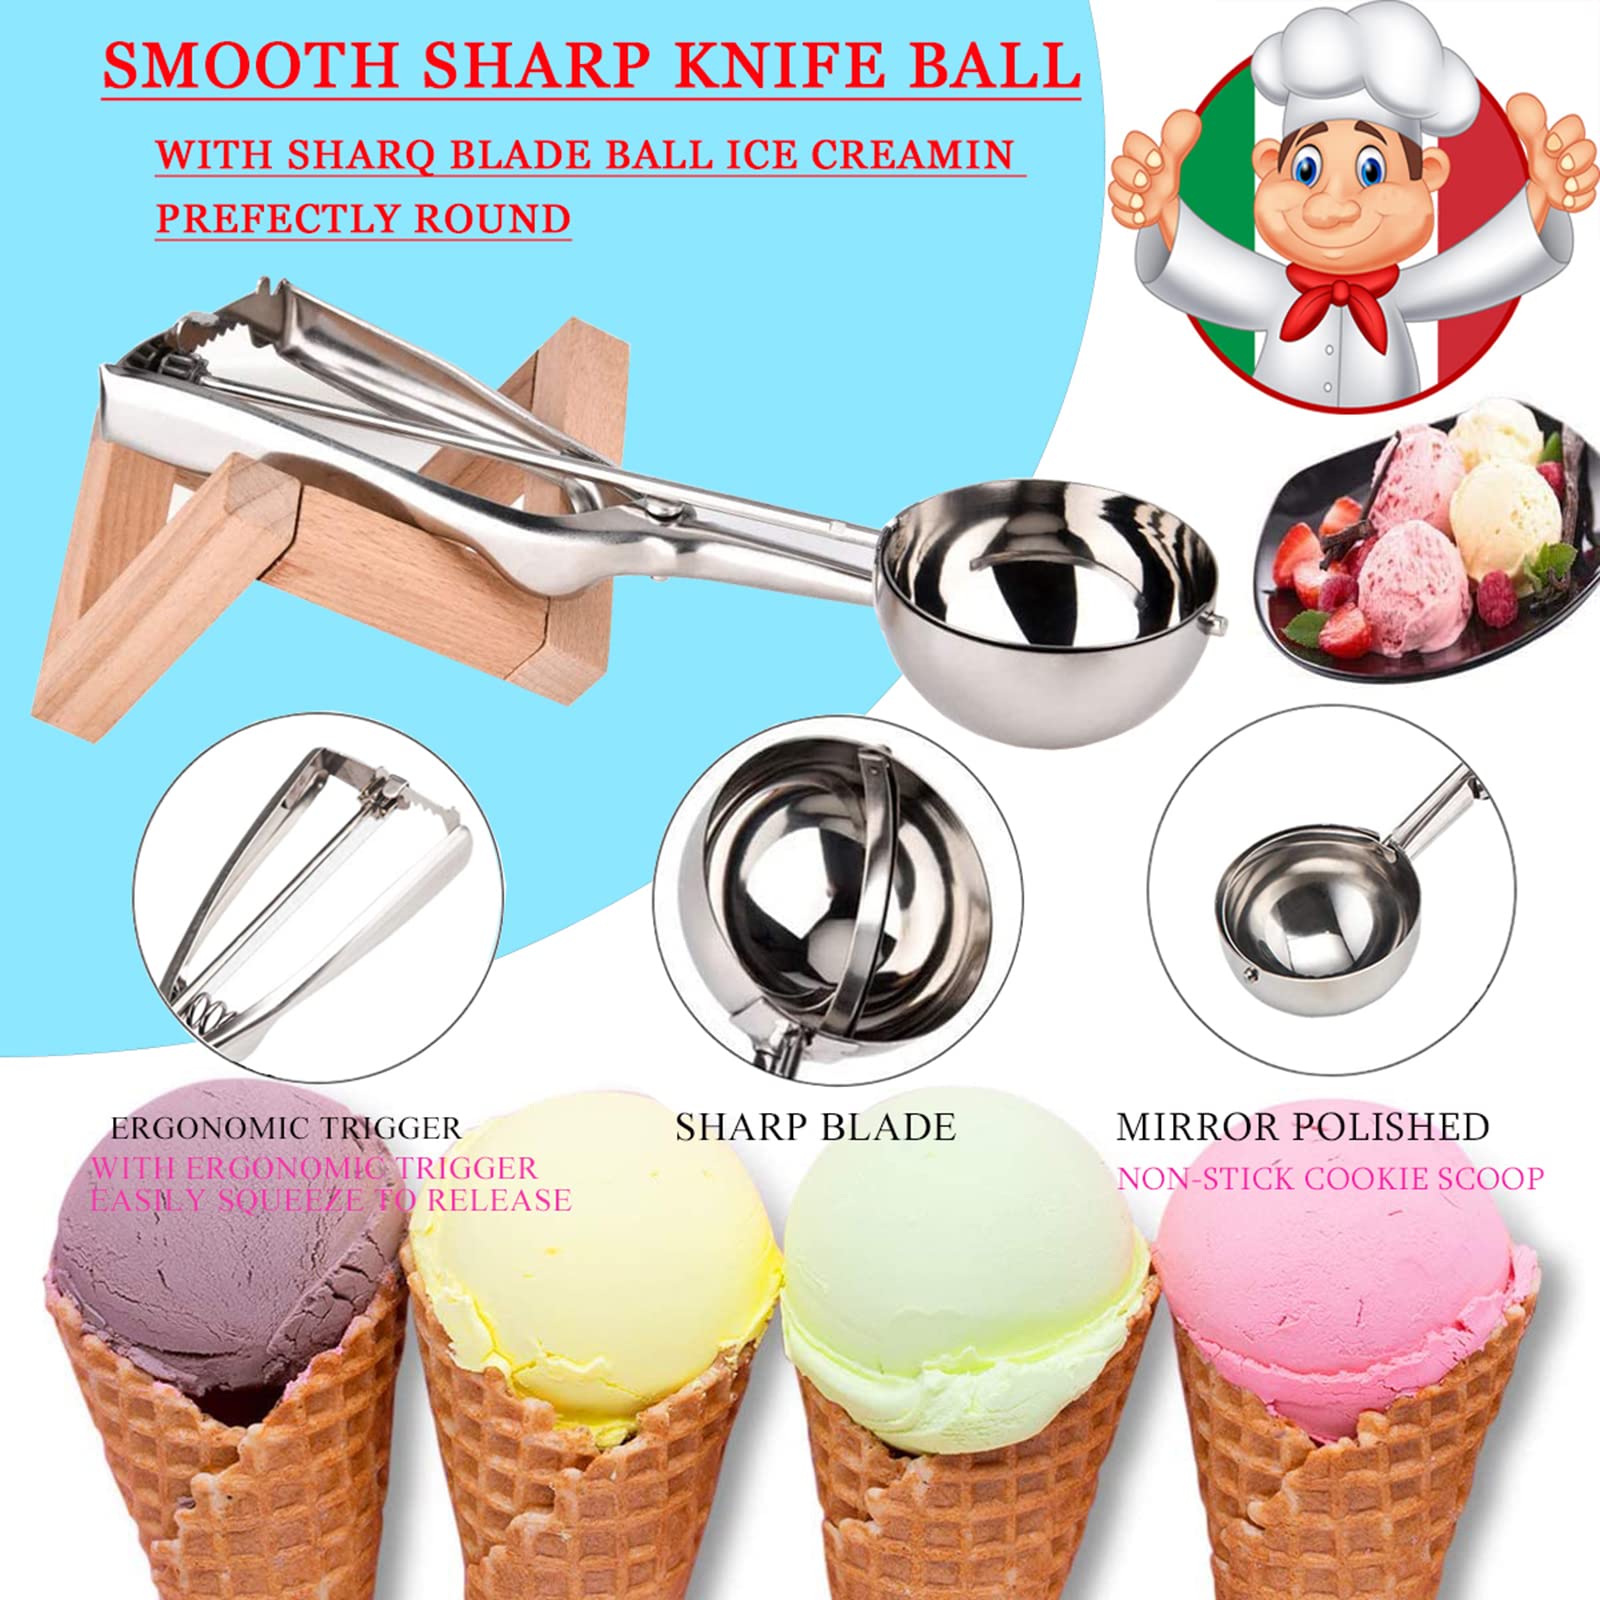 Cookie Scoop, Ice Cream Scooper set with Trigger, Small, Medium and Large Stainless Steel Cookie Scoops Set of 3 for Baking, Ergonomic Handle Cookie Dough Scoop, 3 PACK